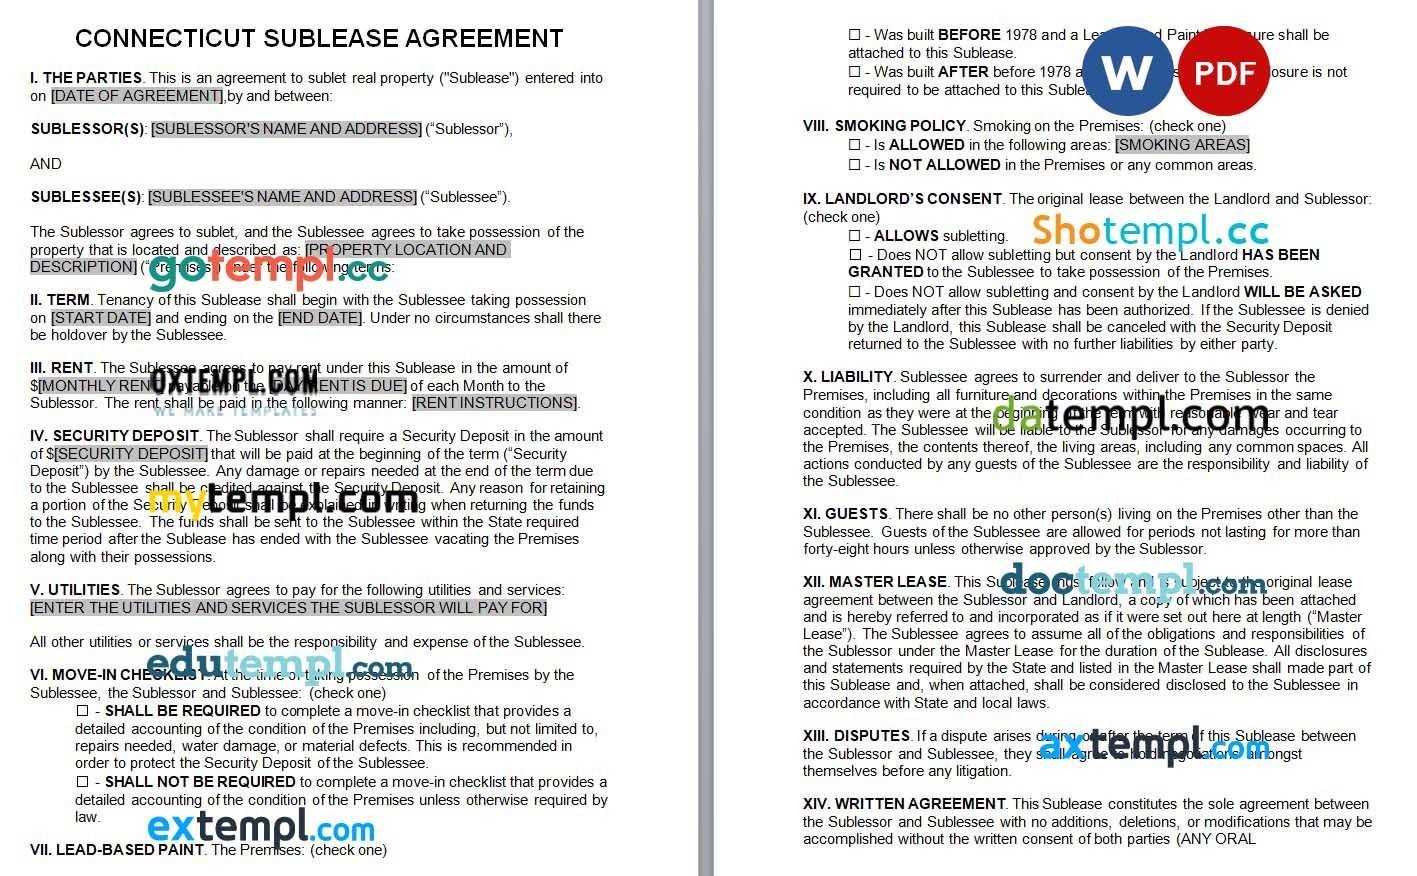 Connecticut Sublease Agreement Word example, fully editable